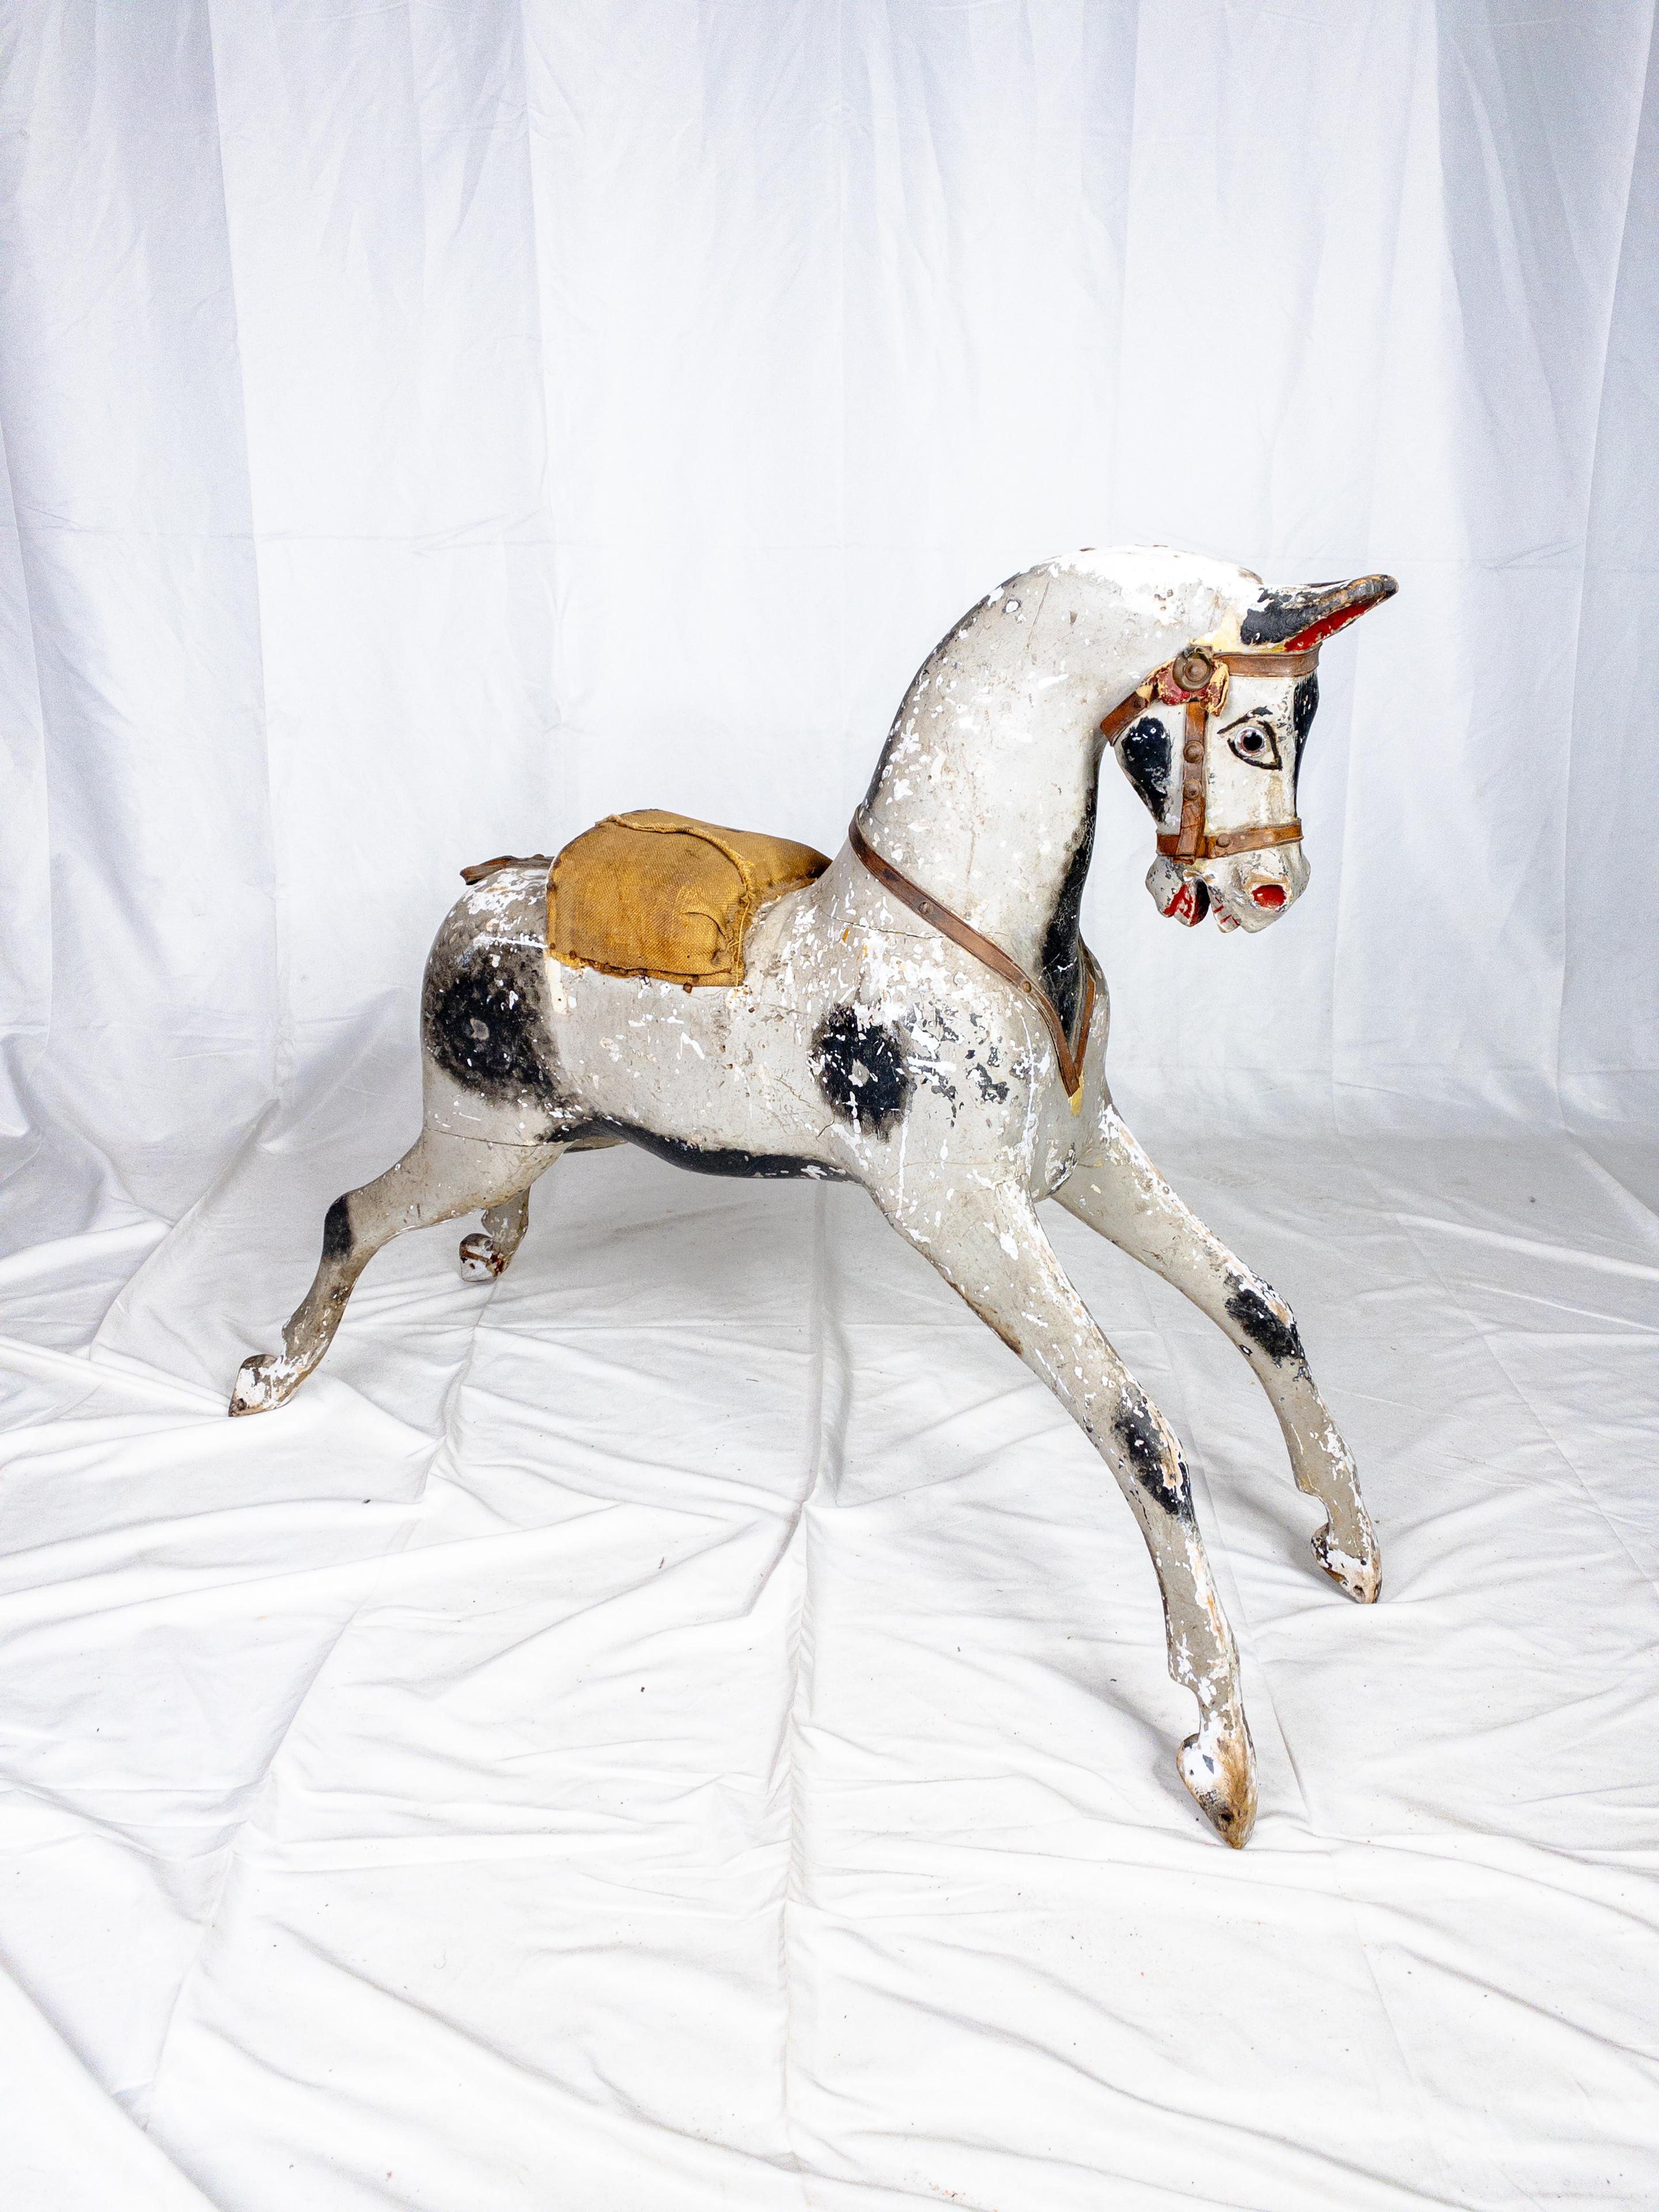 The 19th Century Original Paint Rocking Horse, with its missing rocker, remains a nostalgic relic, whispering tales of bygone eras and childhood whimsy. Despite its age, the charming equine figure retains vestiges of its original paint, evoking a